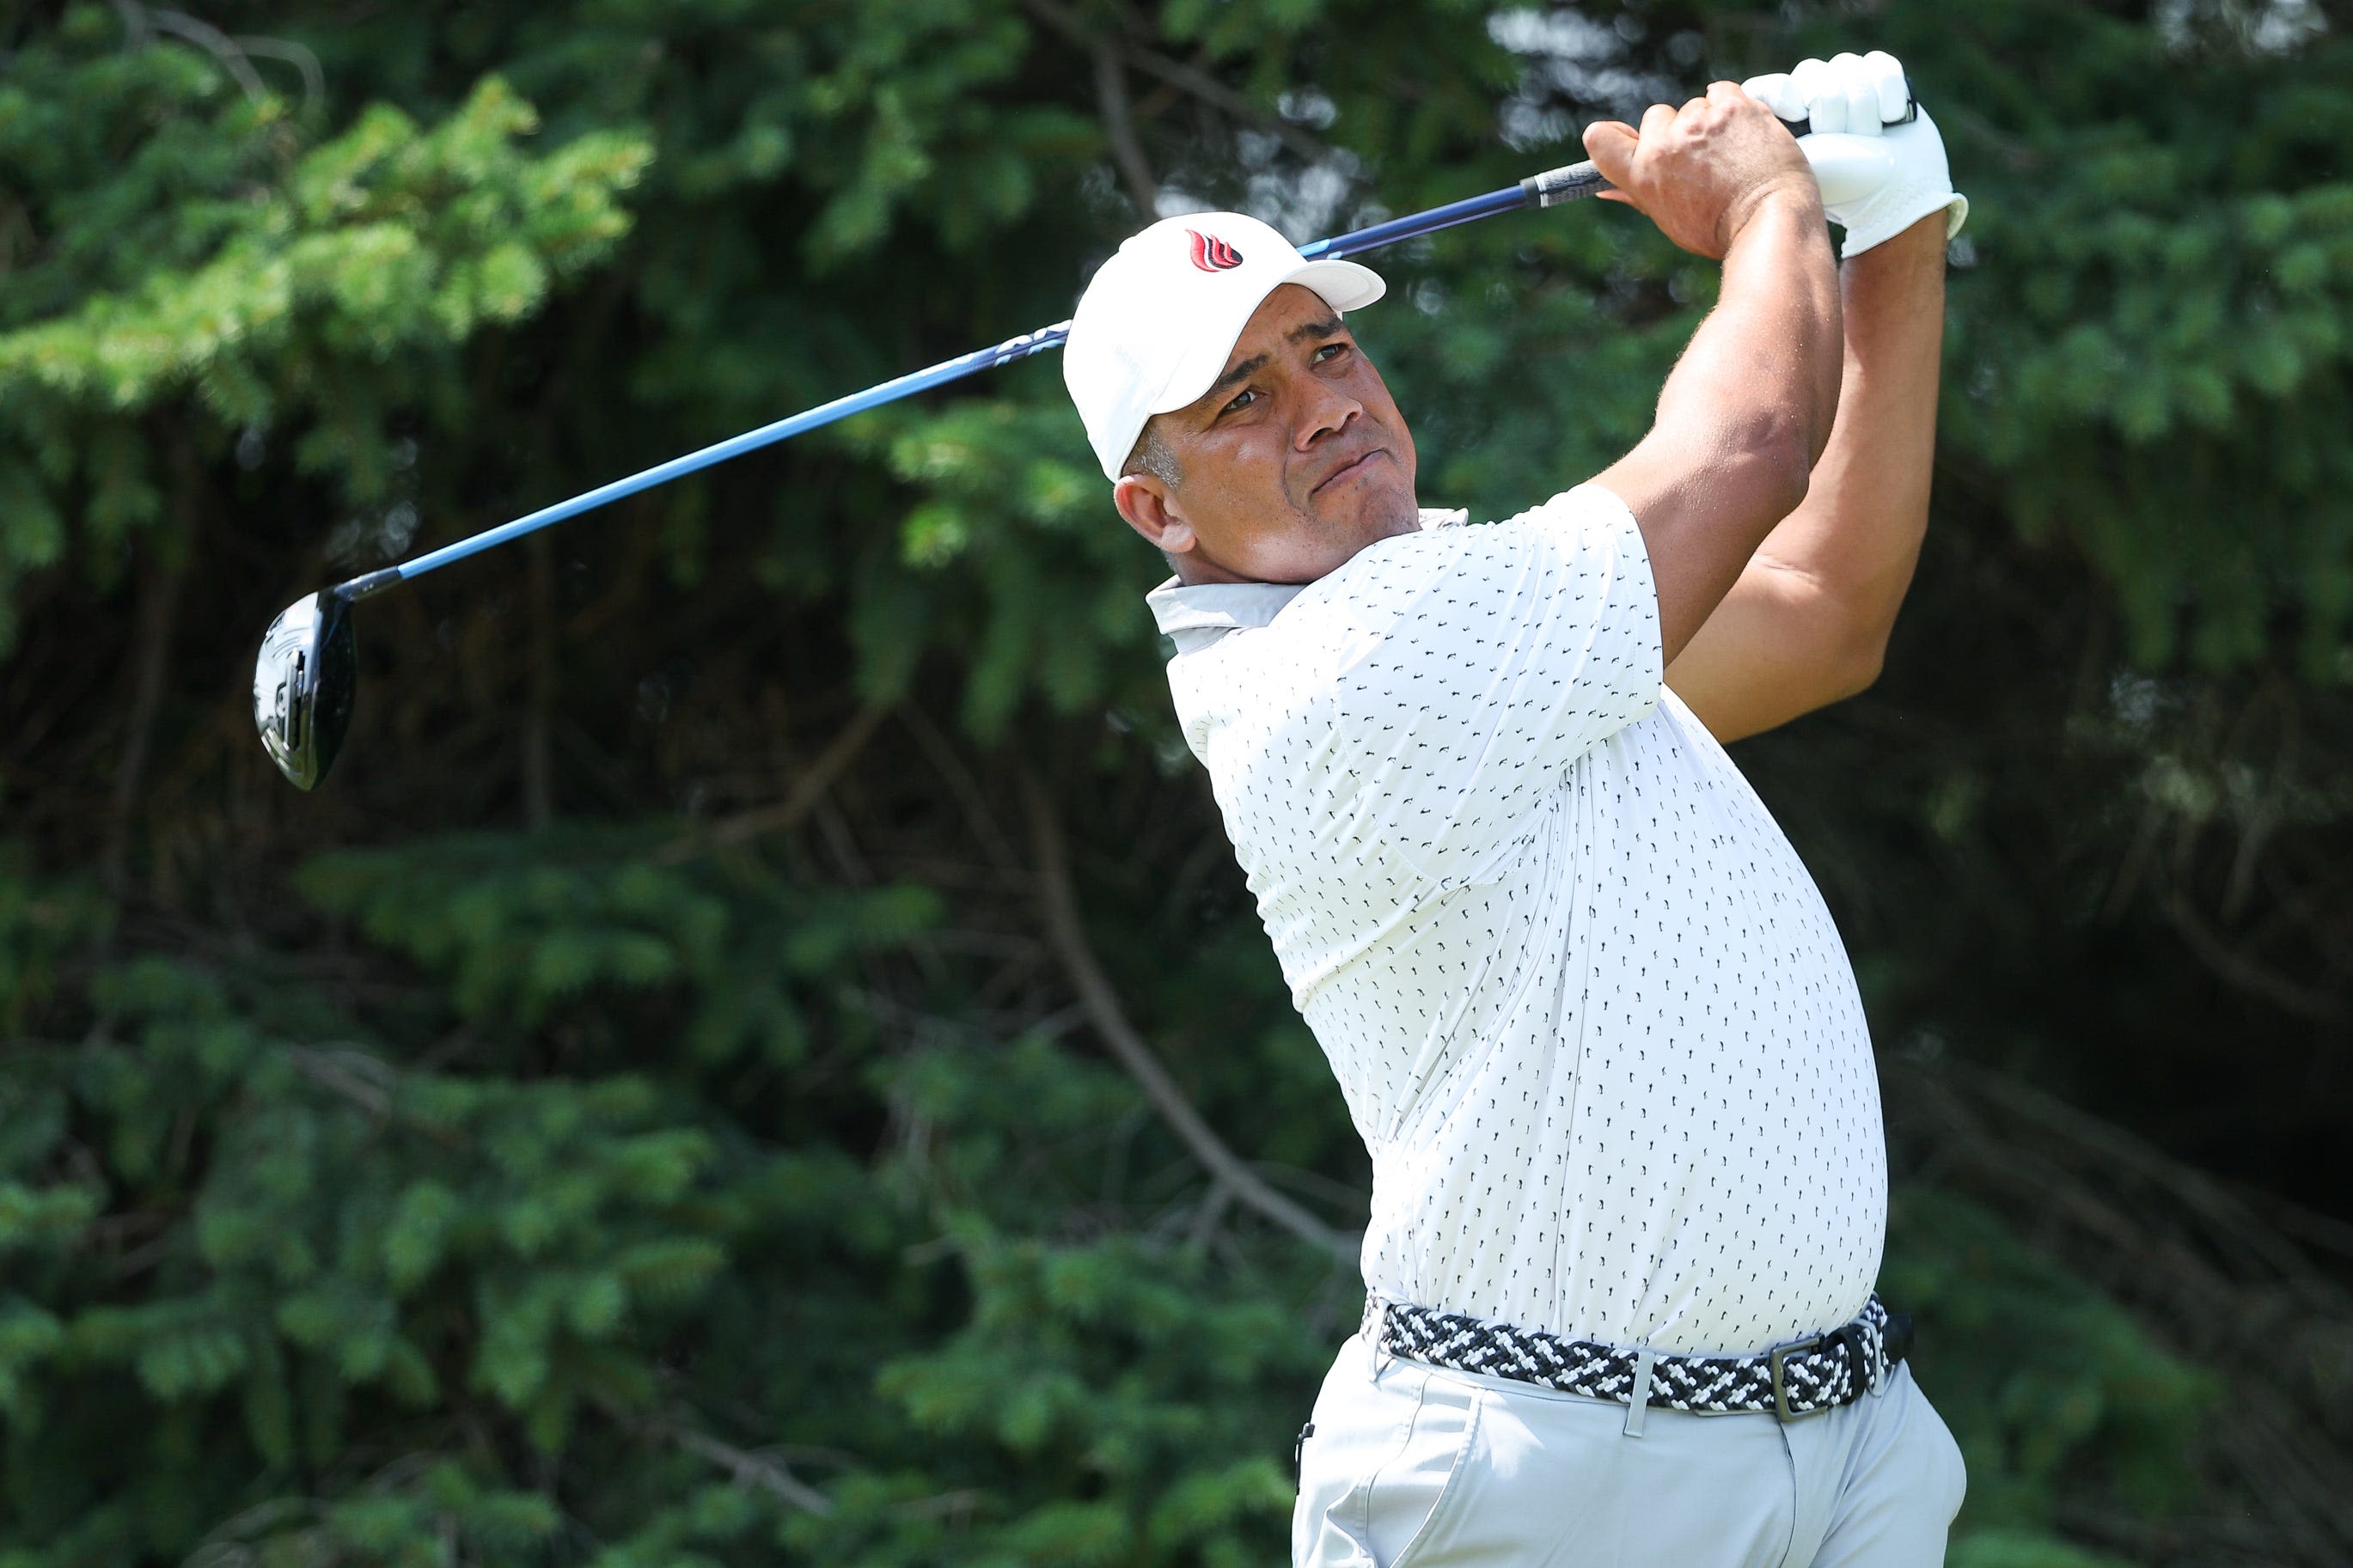 Vets rule at 3M Open as Jhonattan Vegas and Matt Kuchar are in front, Sahith Theegala lurking